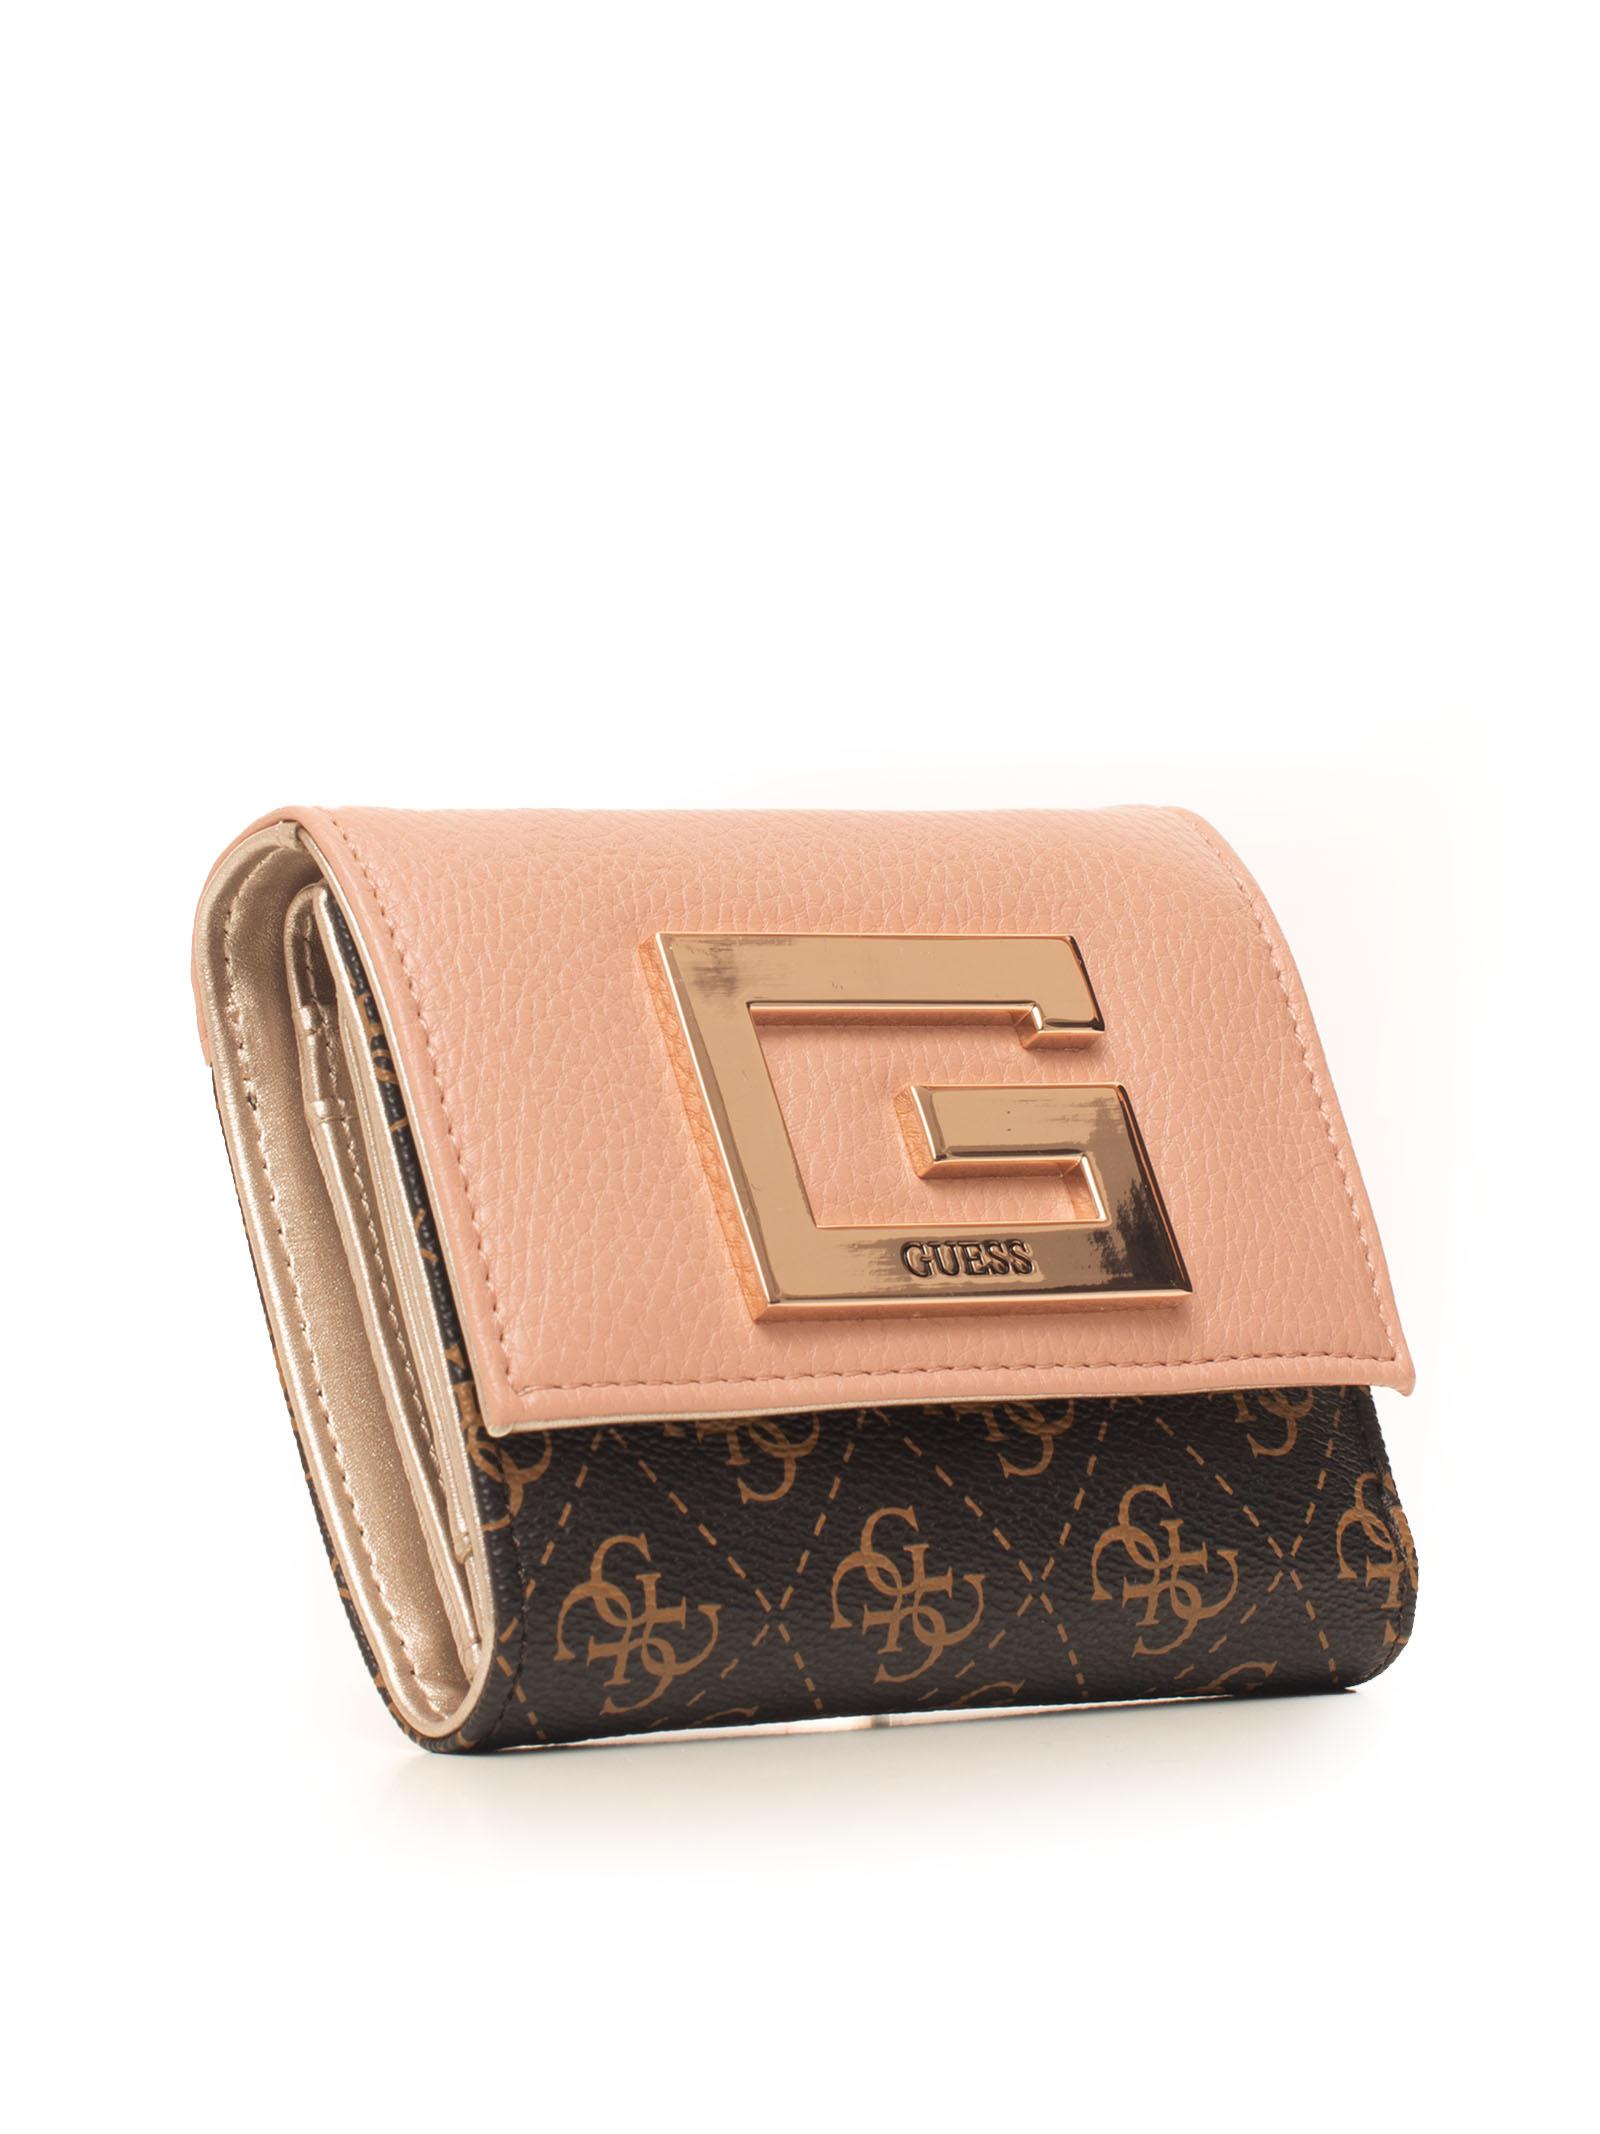 Guess Brightside Wallet Small Size Brown Polyurethane | Lyst